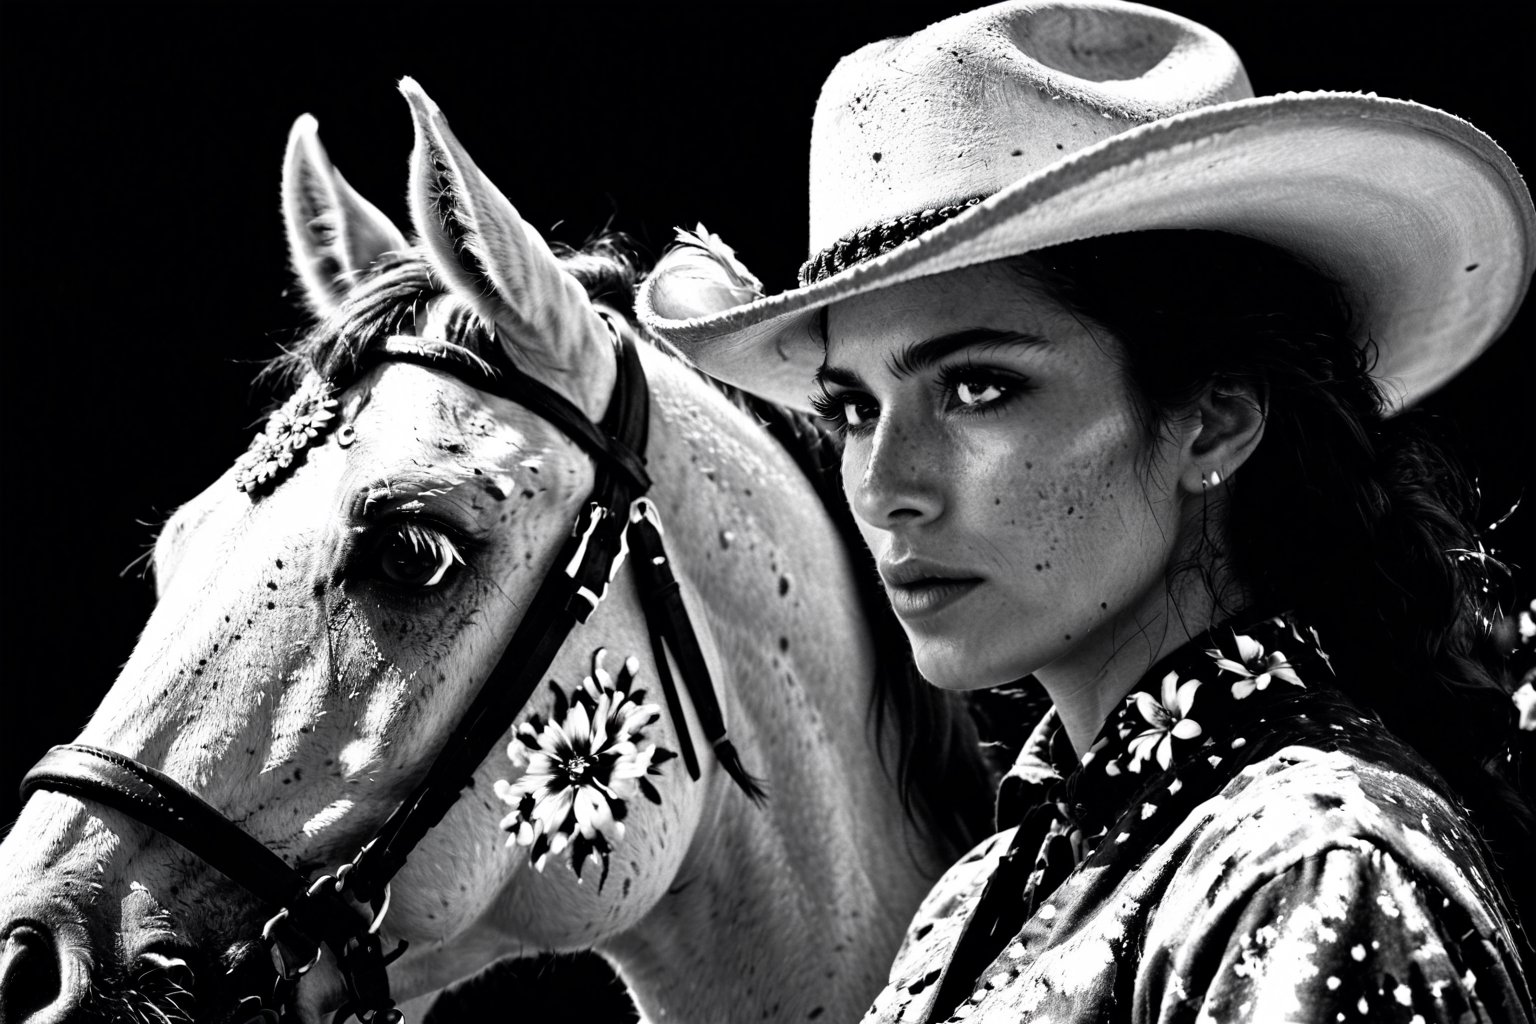 ansel adams style photo of a female charro rider looking down in front of the alamo, battle of flowers parade, horse with flowers, modern rainbow splatter paint, monet style, artistic layout and feel, high contrast image, 4k image, clear faces, good faces, in focus, black and white image, fiesta, in front of the alamo,SD 1.5, naked